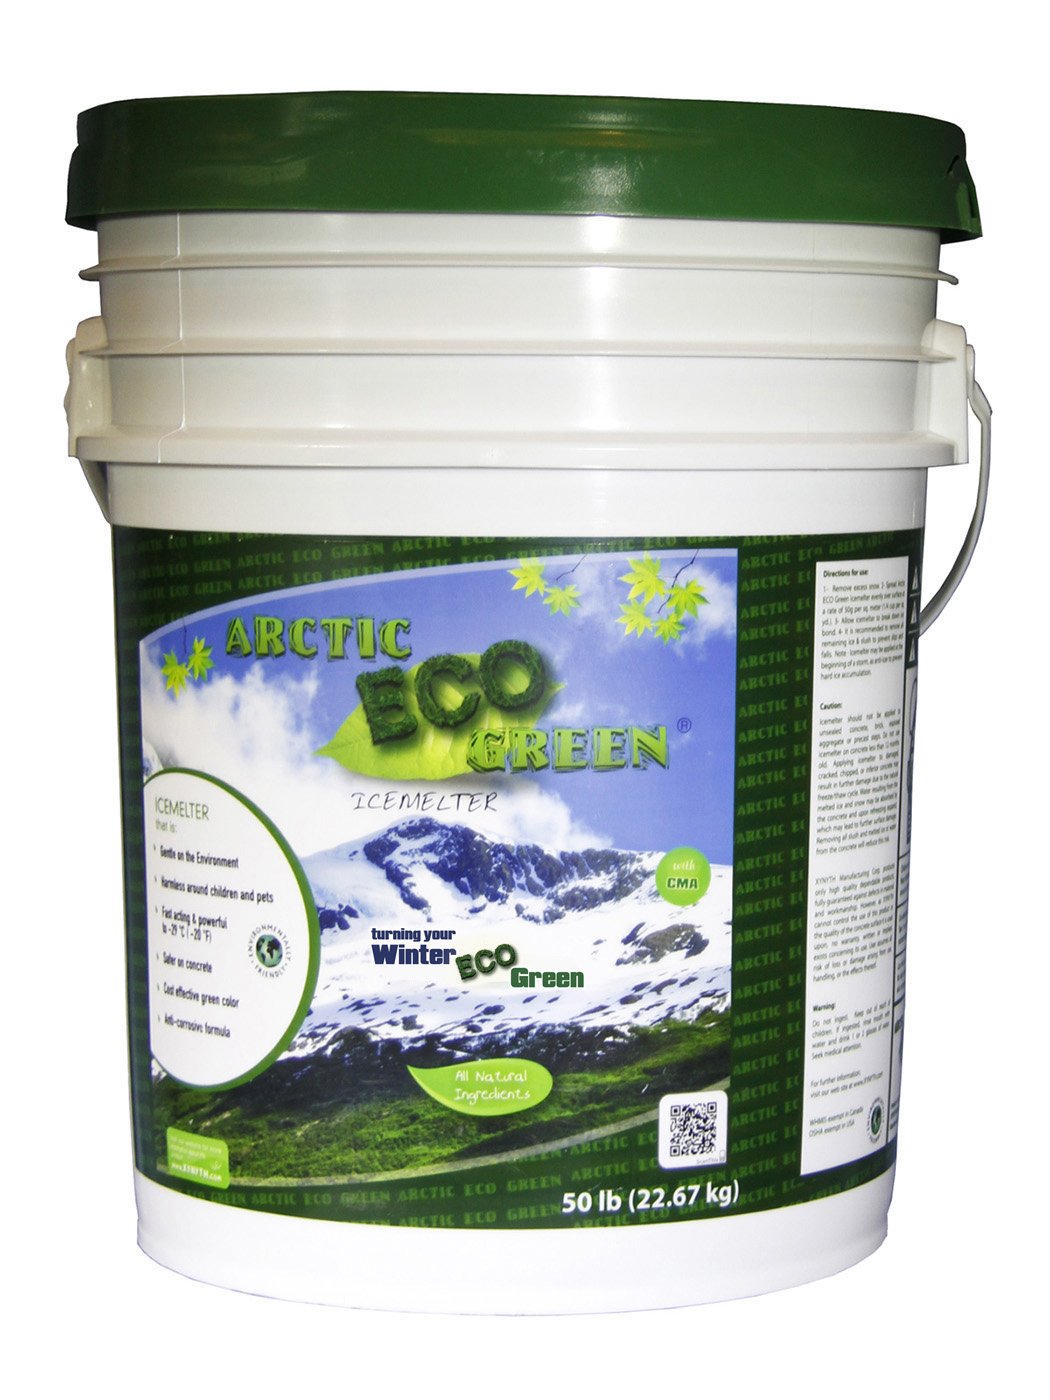 50lb Bucket of Arctic ECO Green Child and Pet Safe All Natural Ice Melts